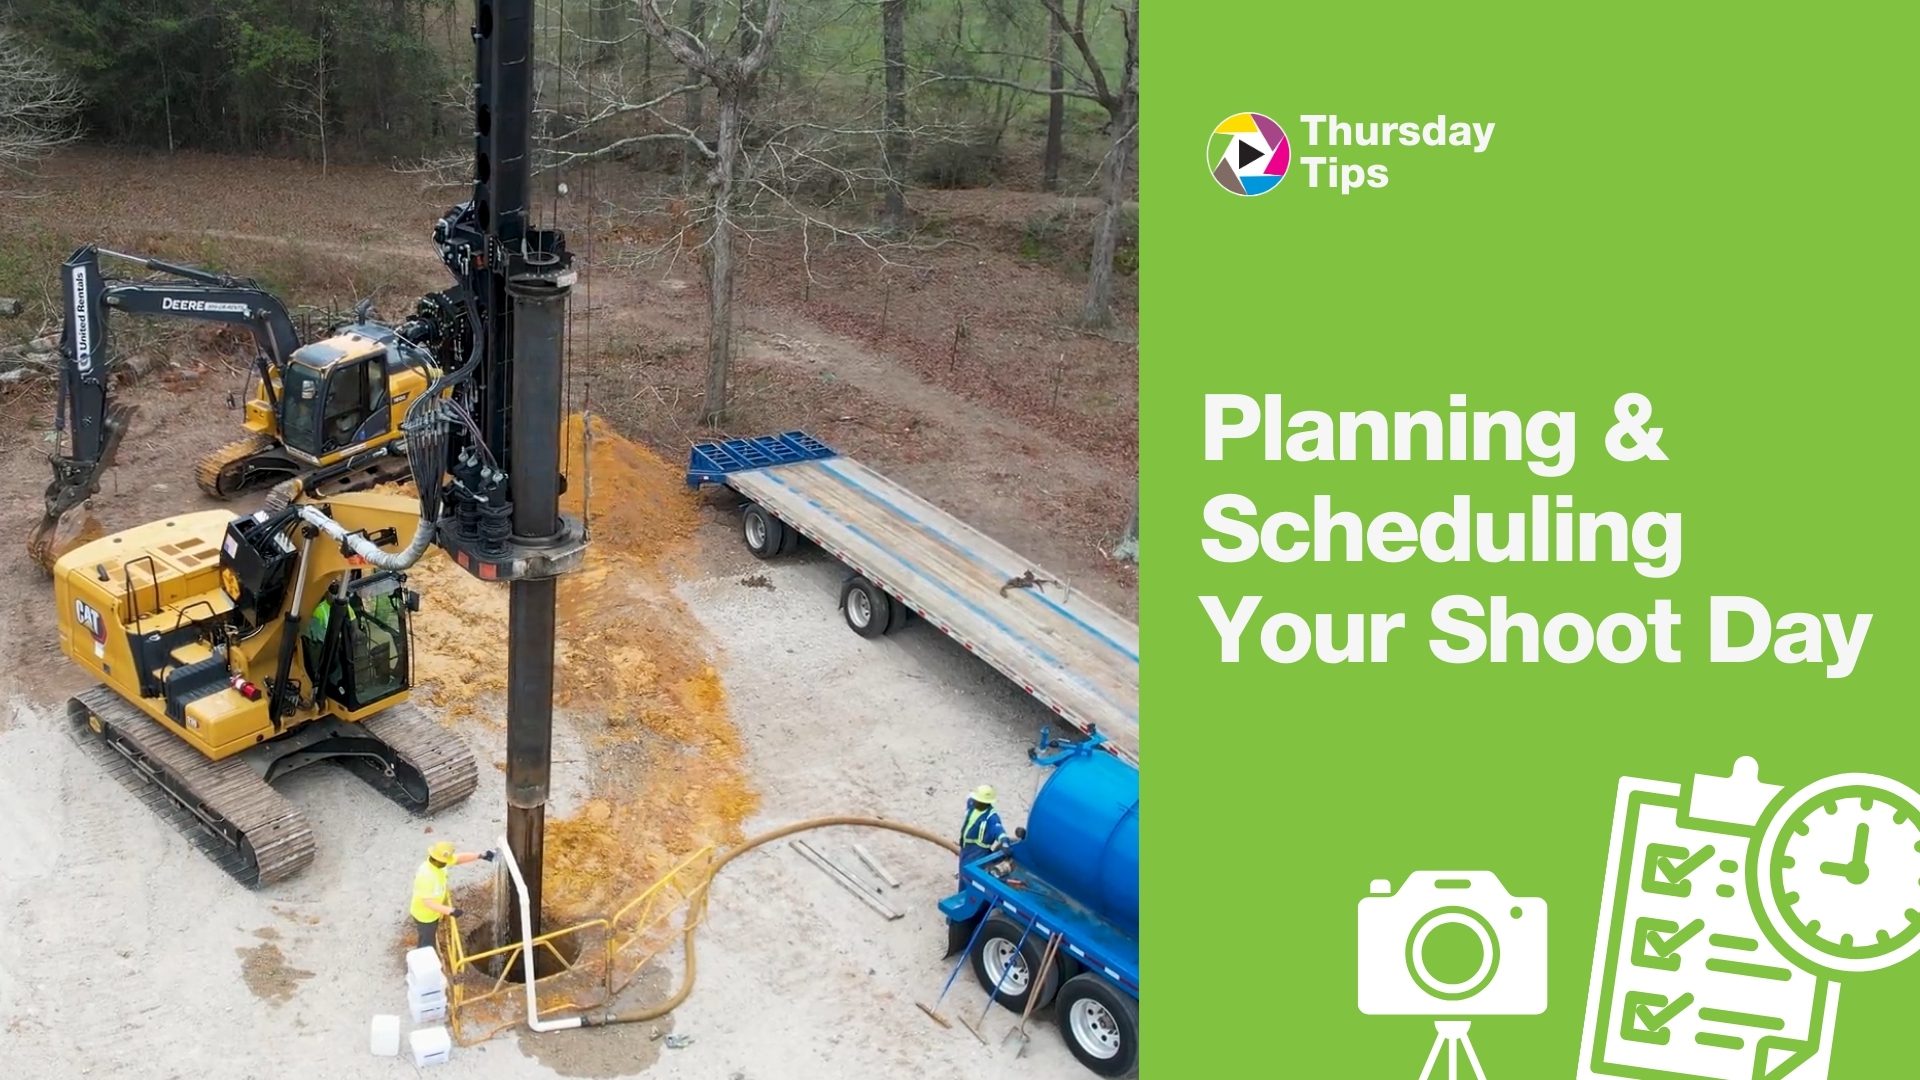 Thursday Tips: Planning & Scheduling Your Shoot Day